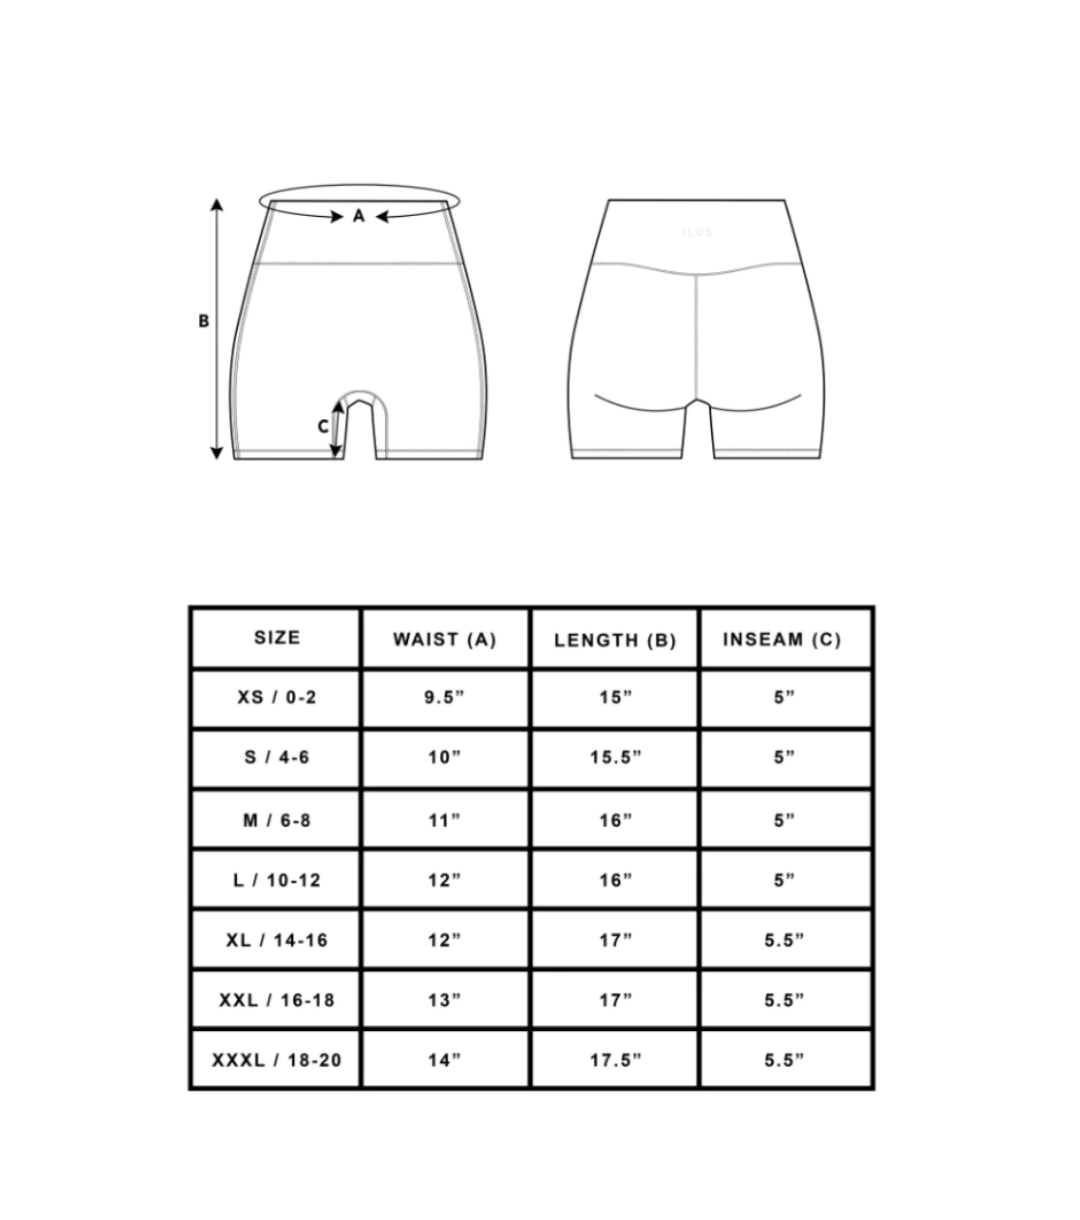 PARALLEL LINEAR SHORTS